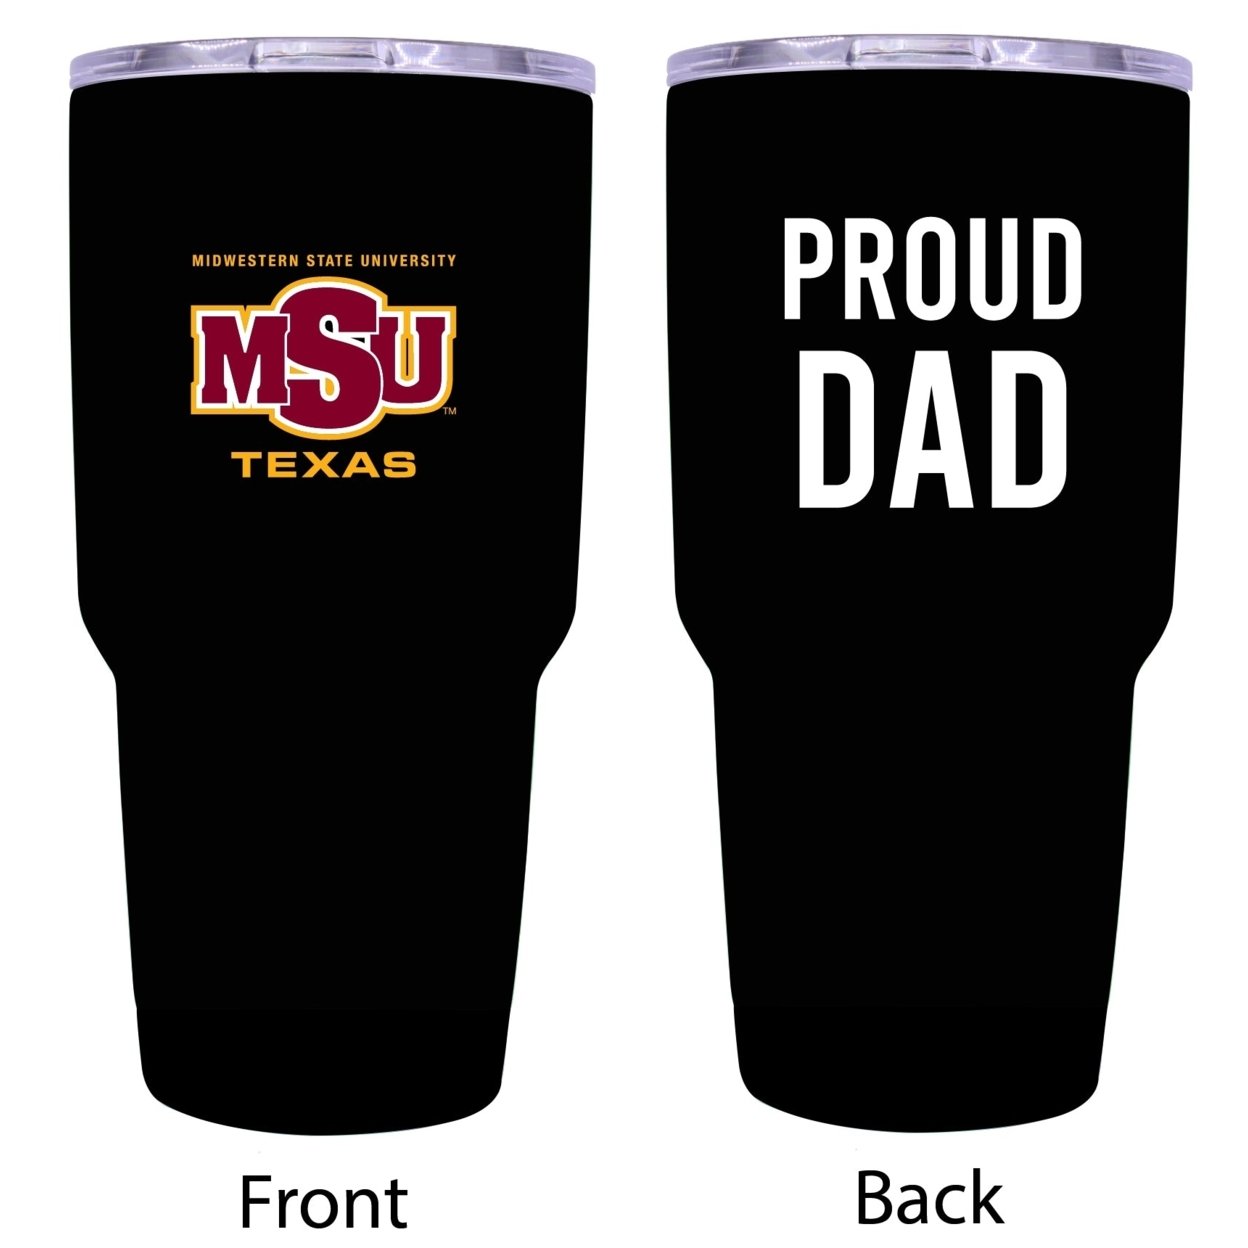 Midwestern State University Proud Dad 24 Oz Insulated Stainless Steel Tumbler